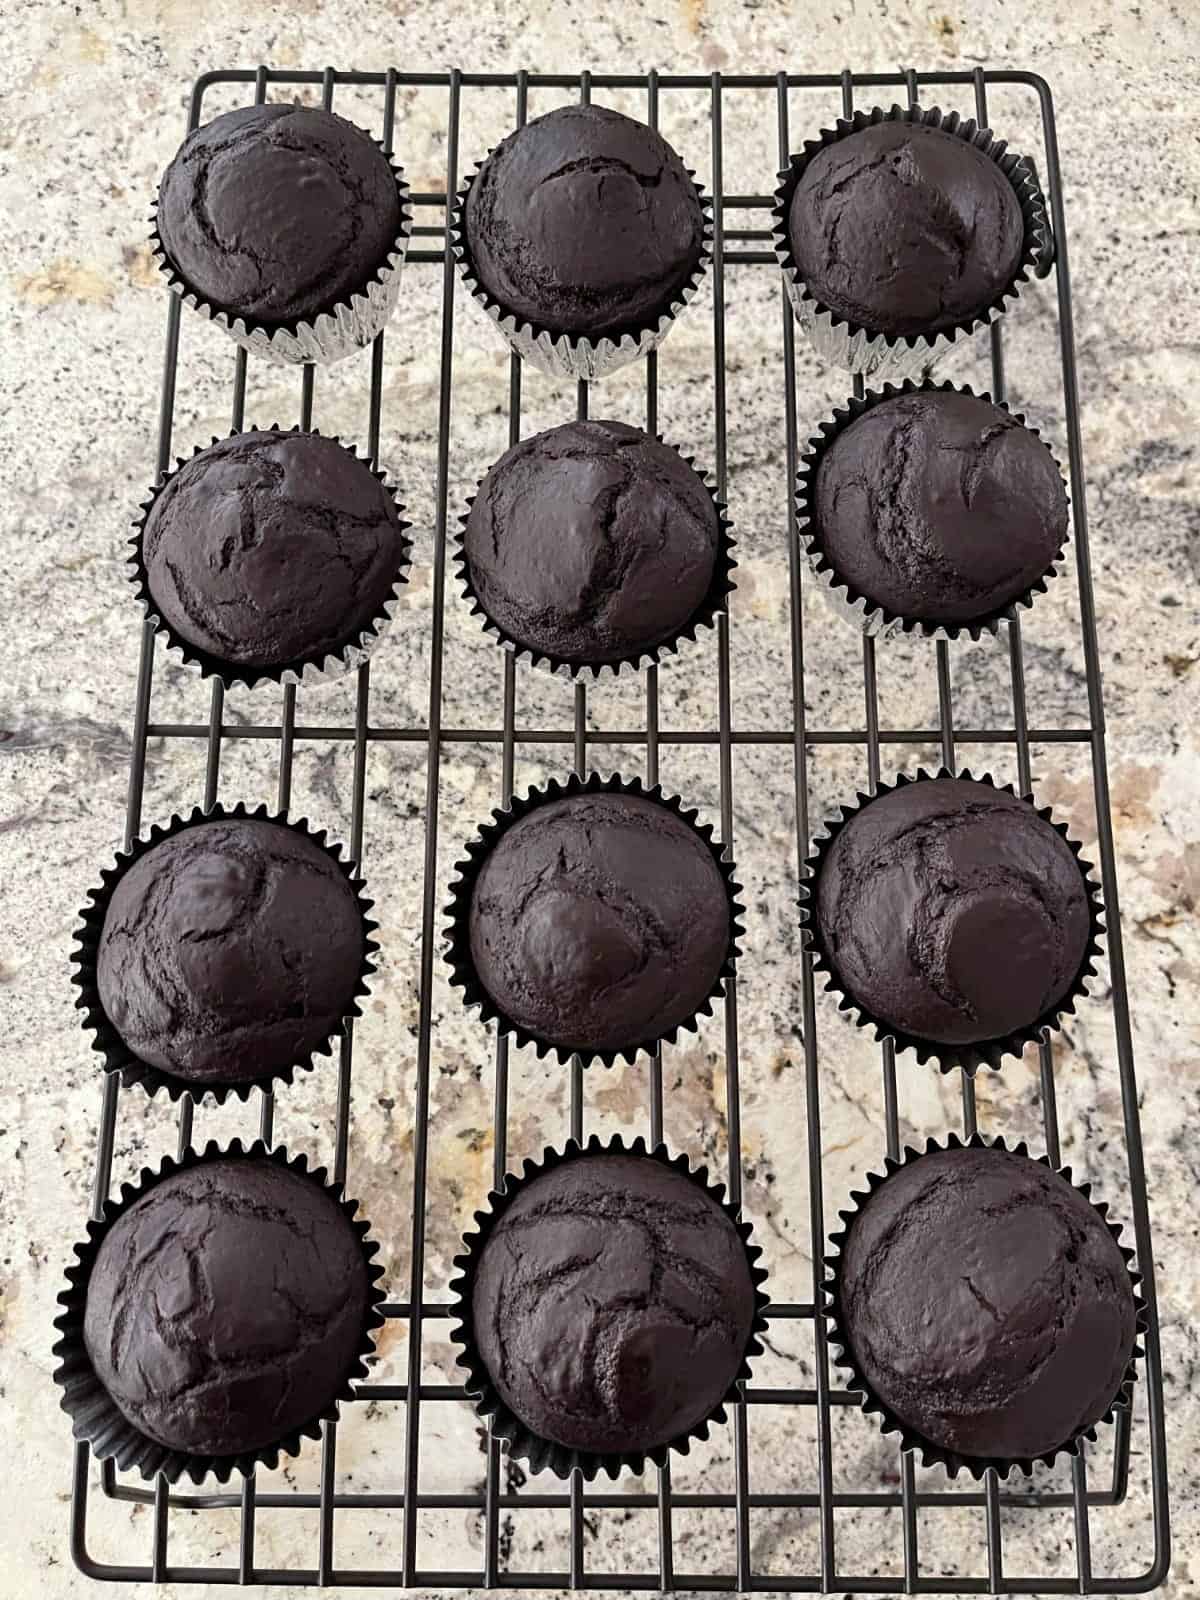 Chocolate cupcakes on wire cooling rack.